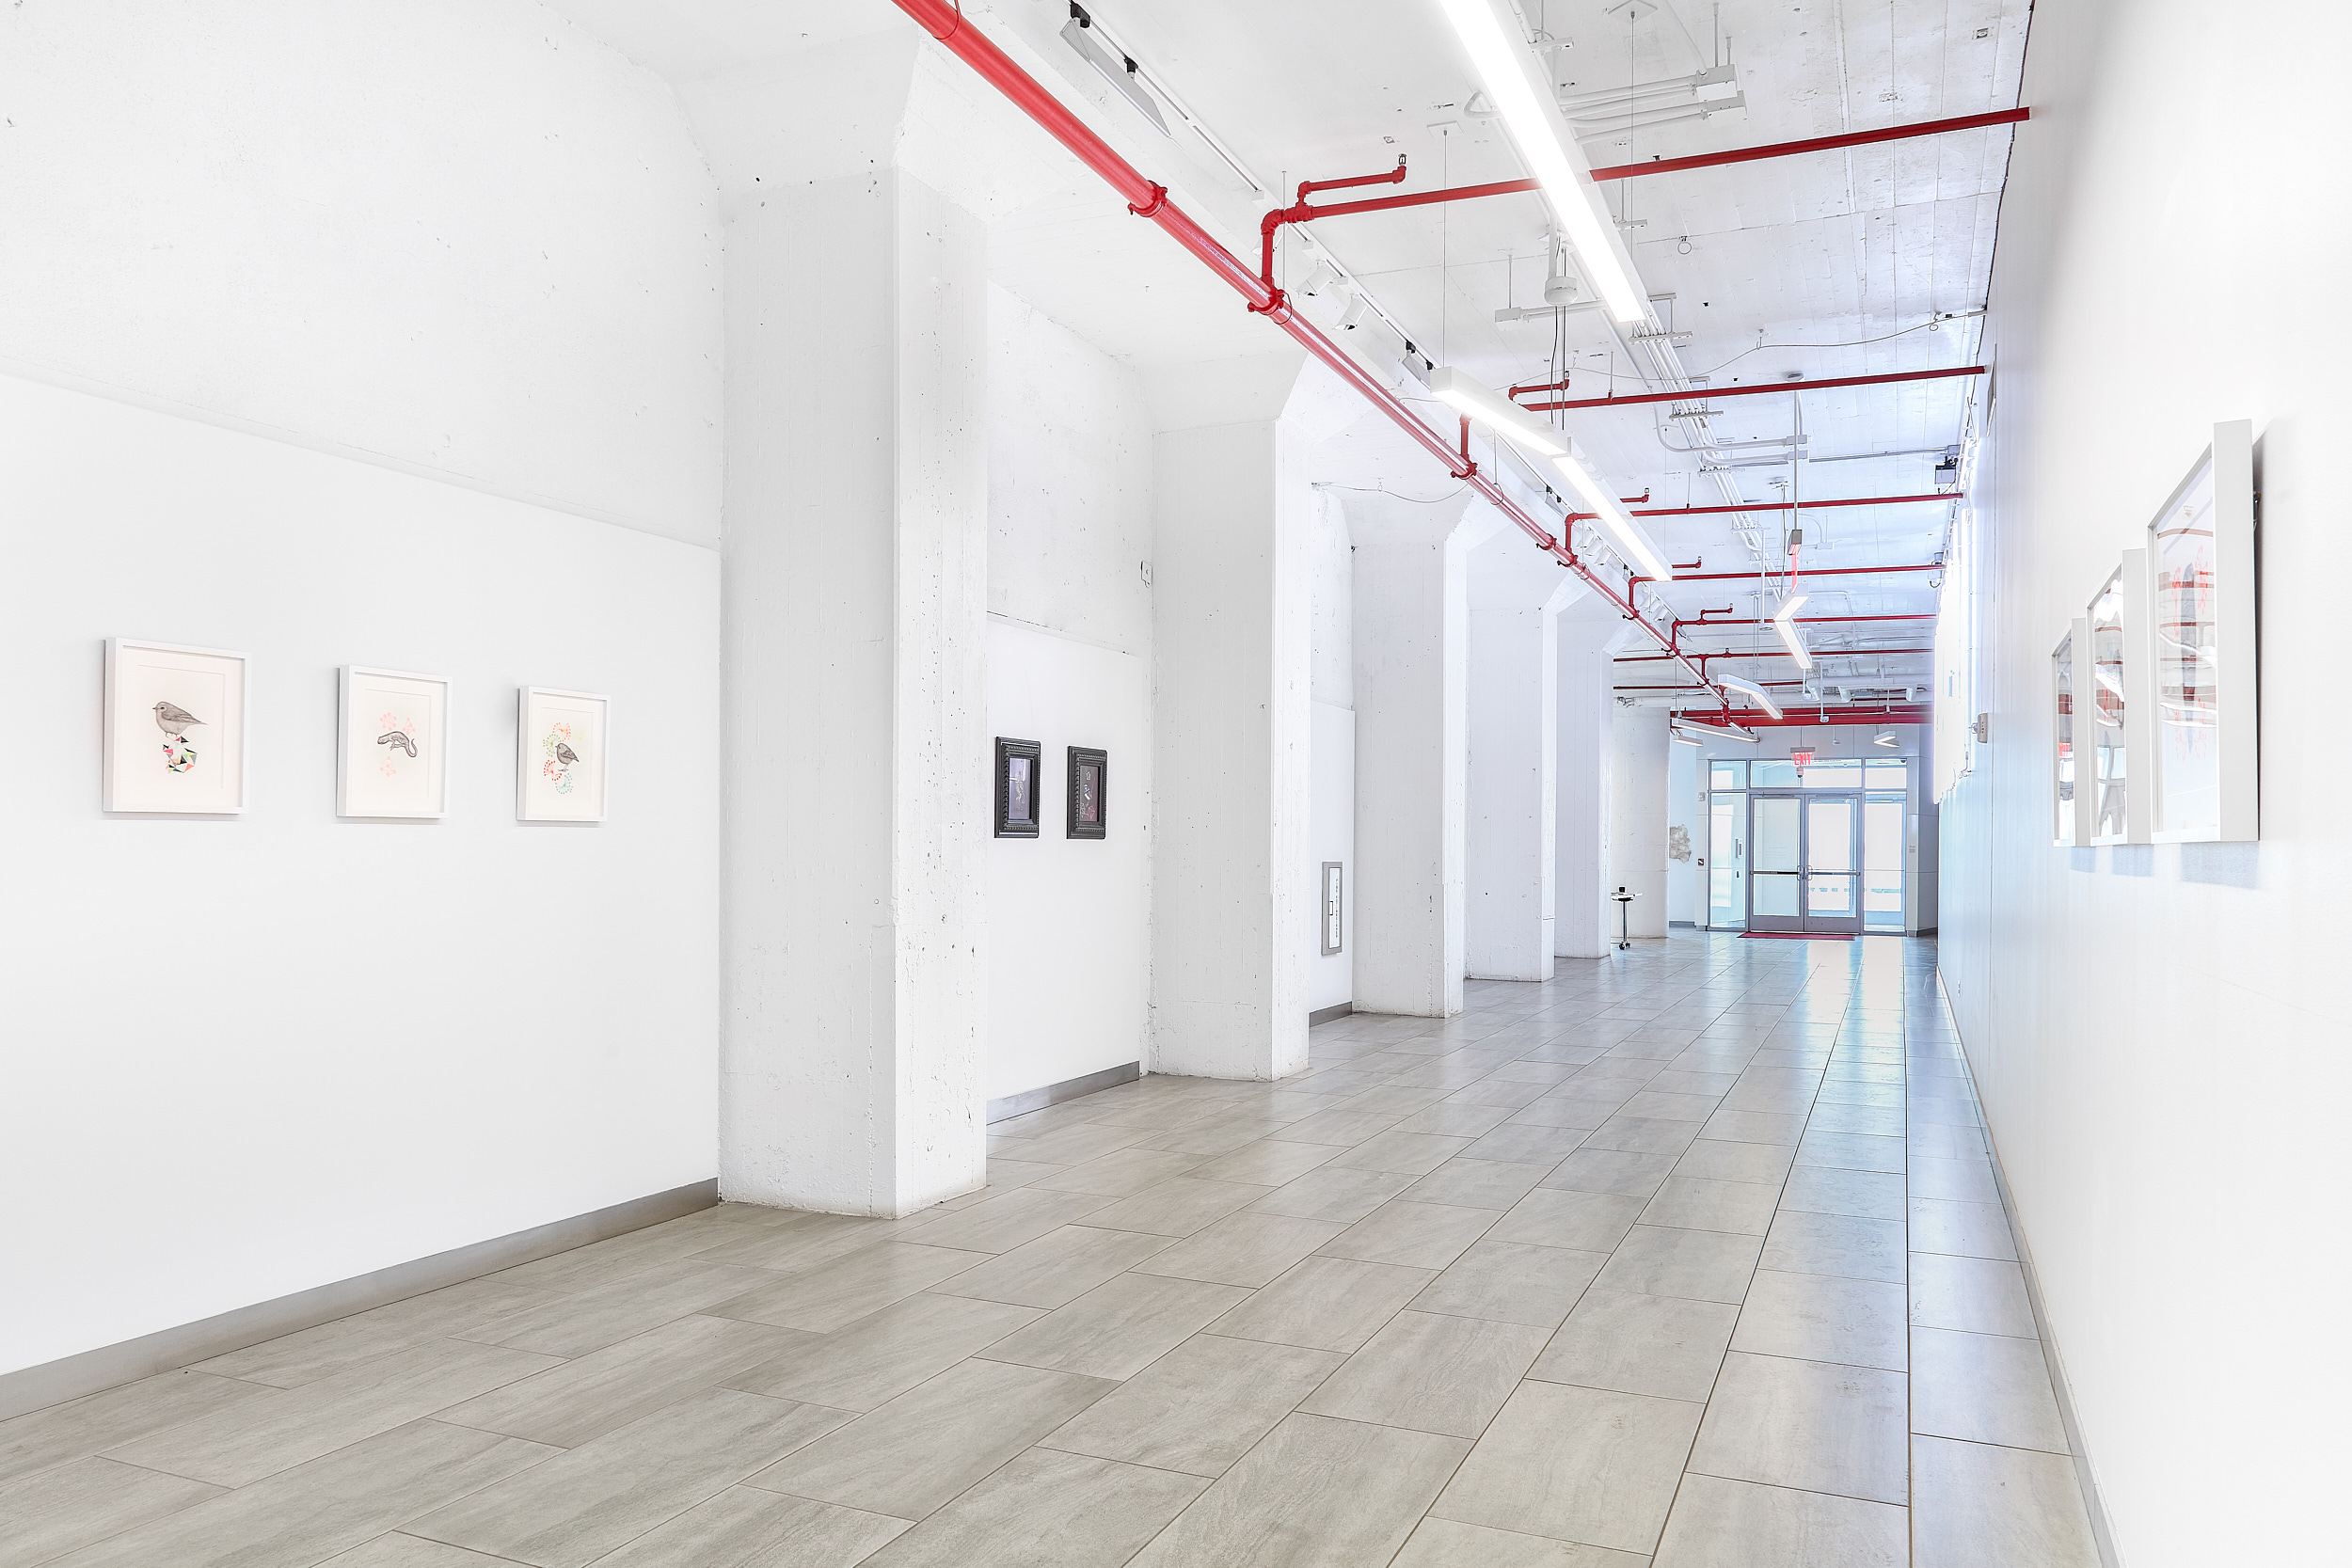  Spontaneous Emergence of Order, Installation View Photography: On White Wall 